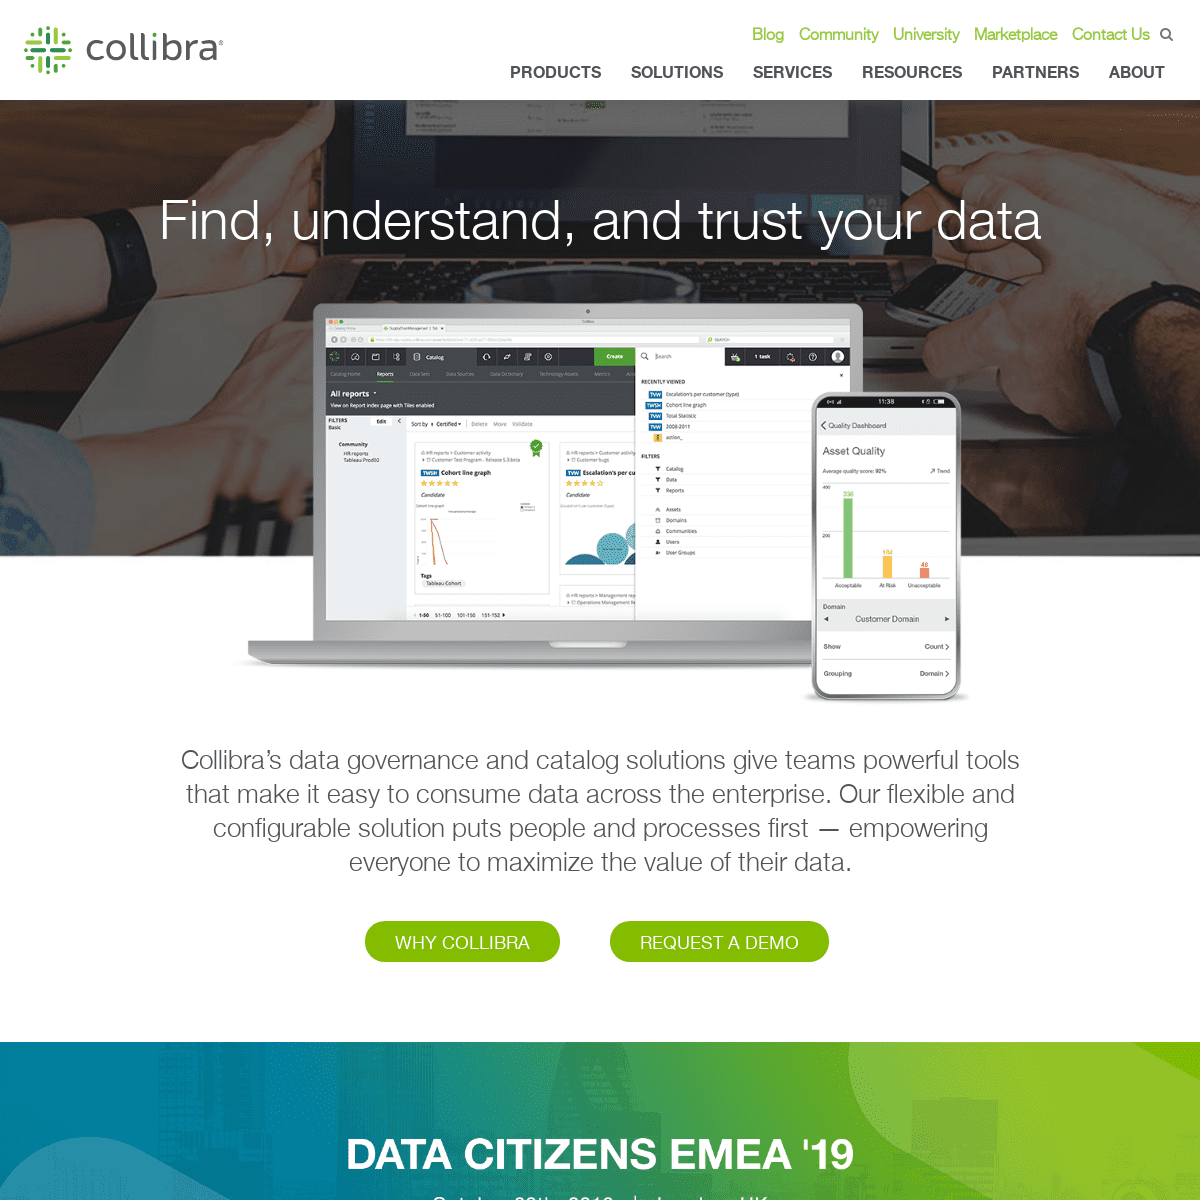 Data Governance to Help You Find, Understand, and Trust Data | Collibra